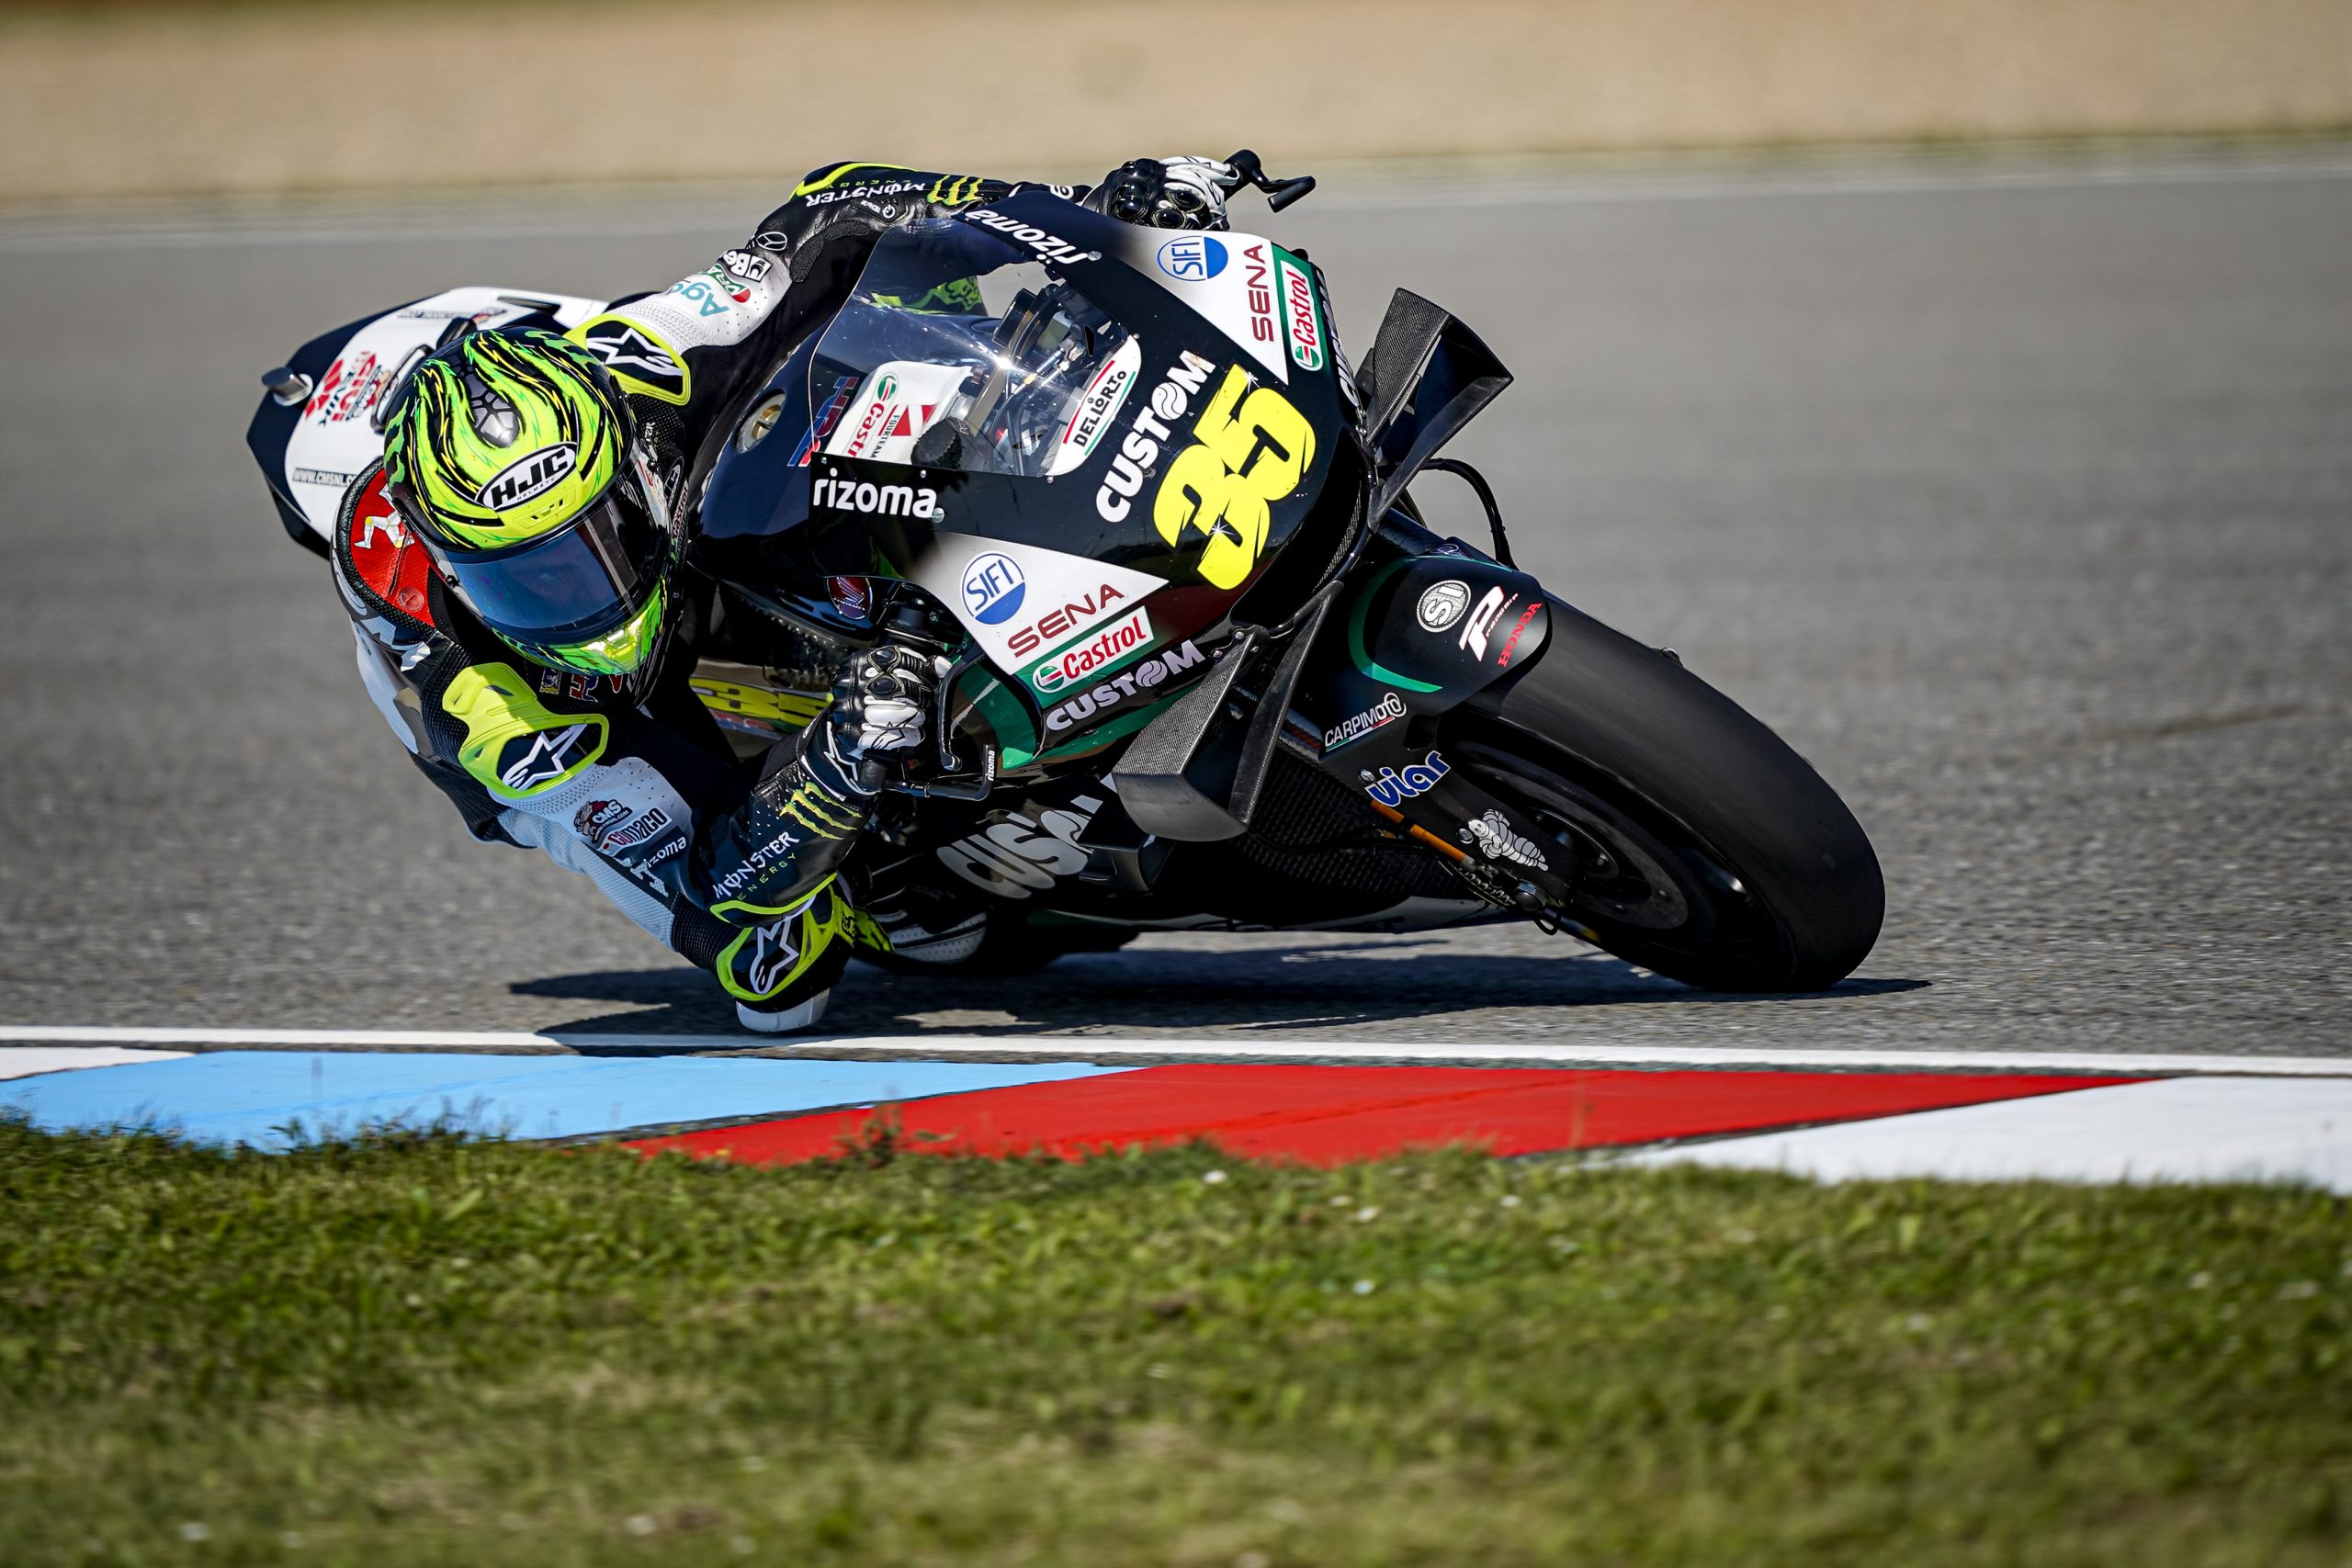 Crutchlow encouraged by opening day in Brno